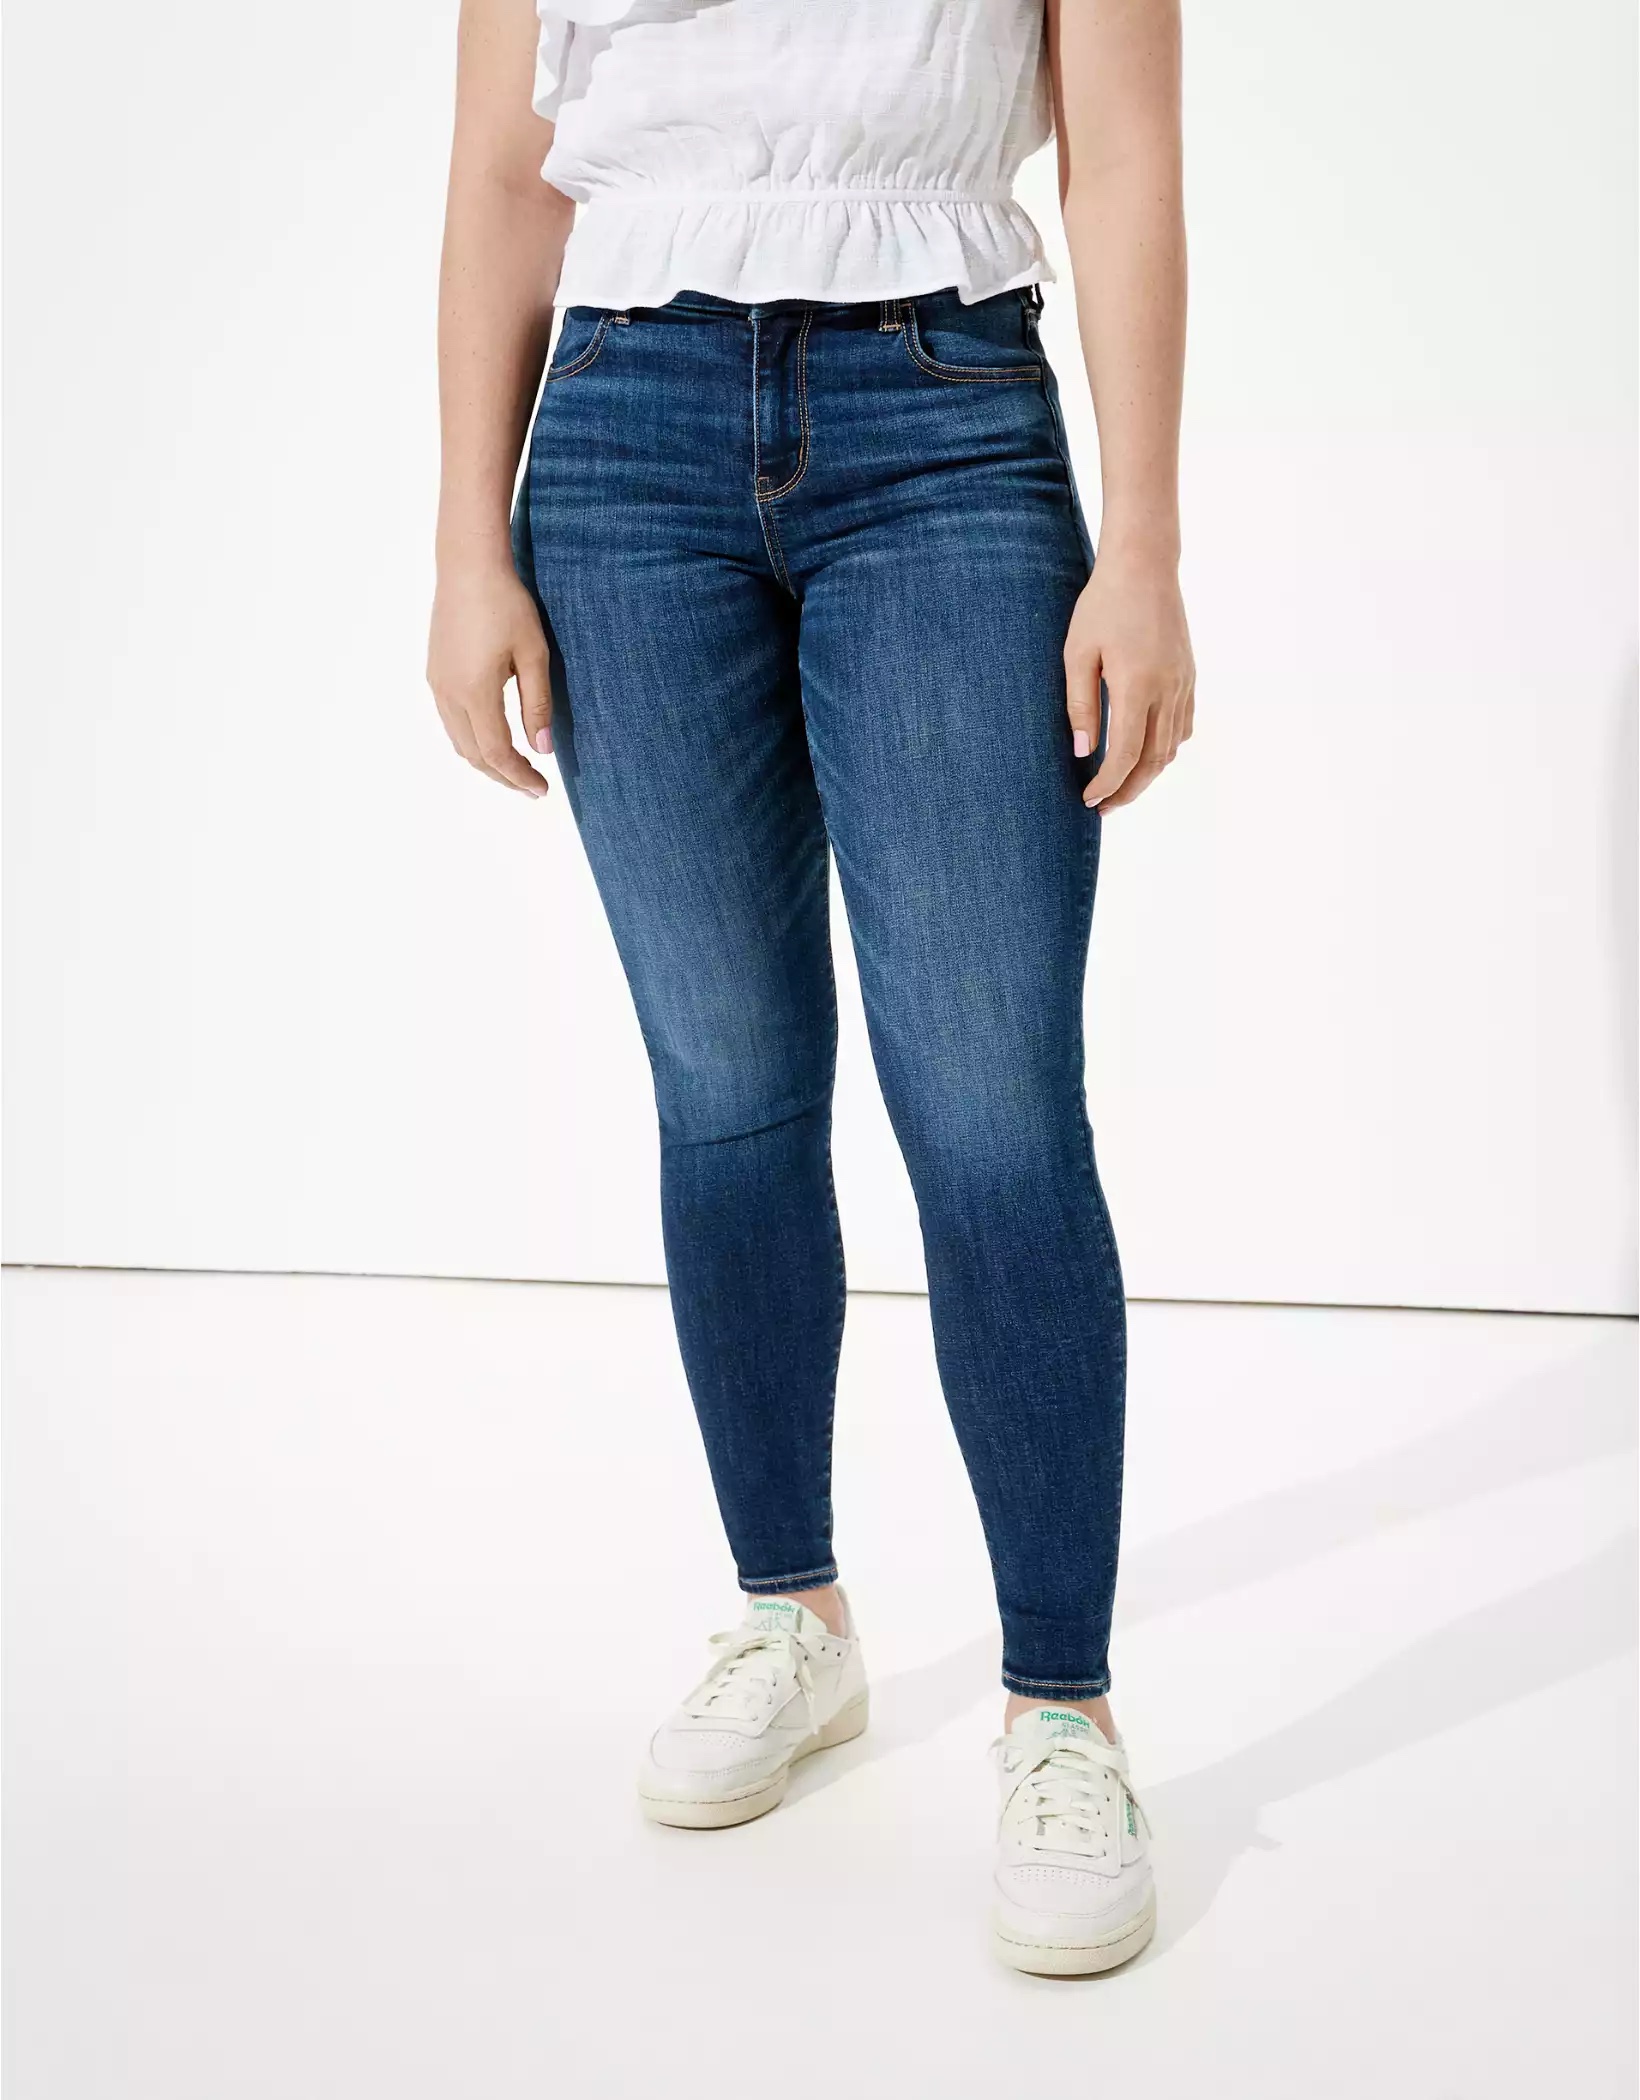 Best Jeans for women to hide belly fat  Distressed Jeans, High Waisted  Jeans, Jeggings etc. 